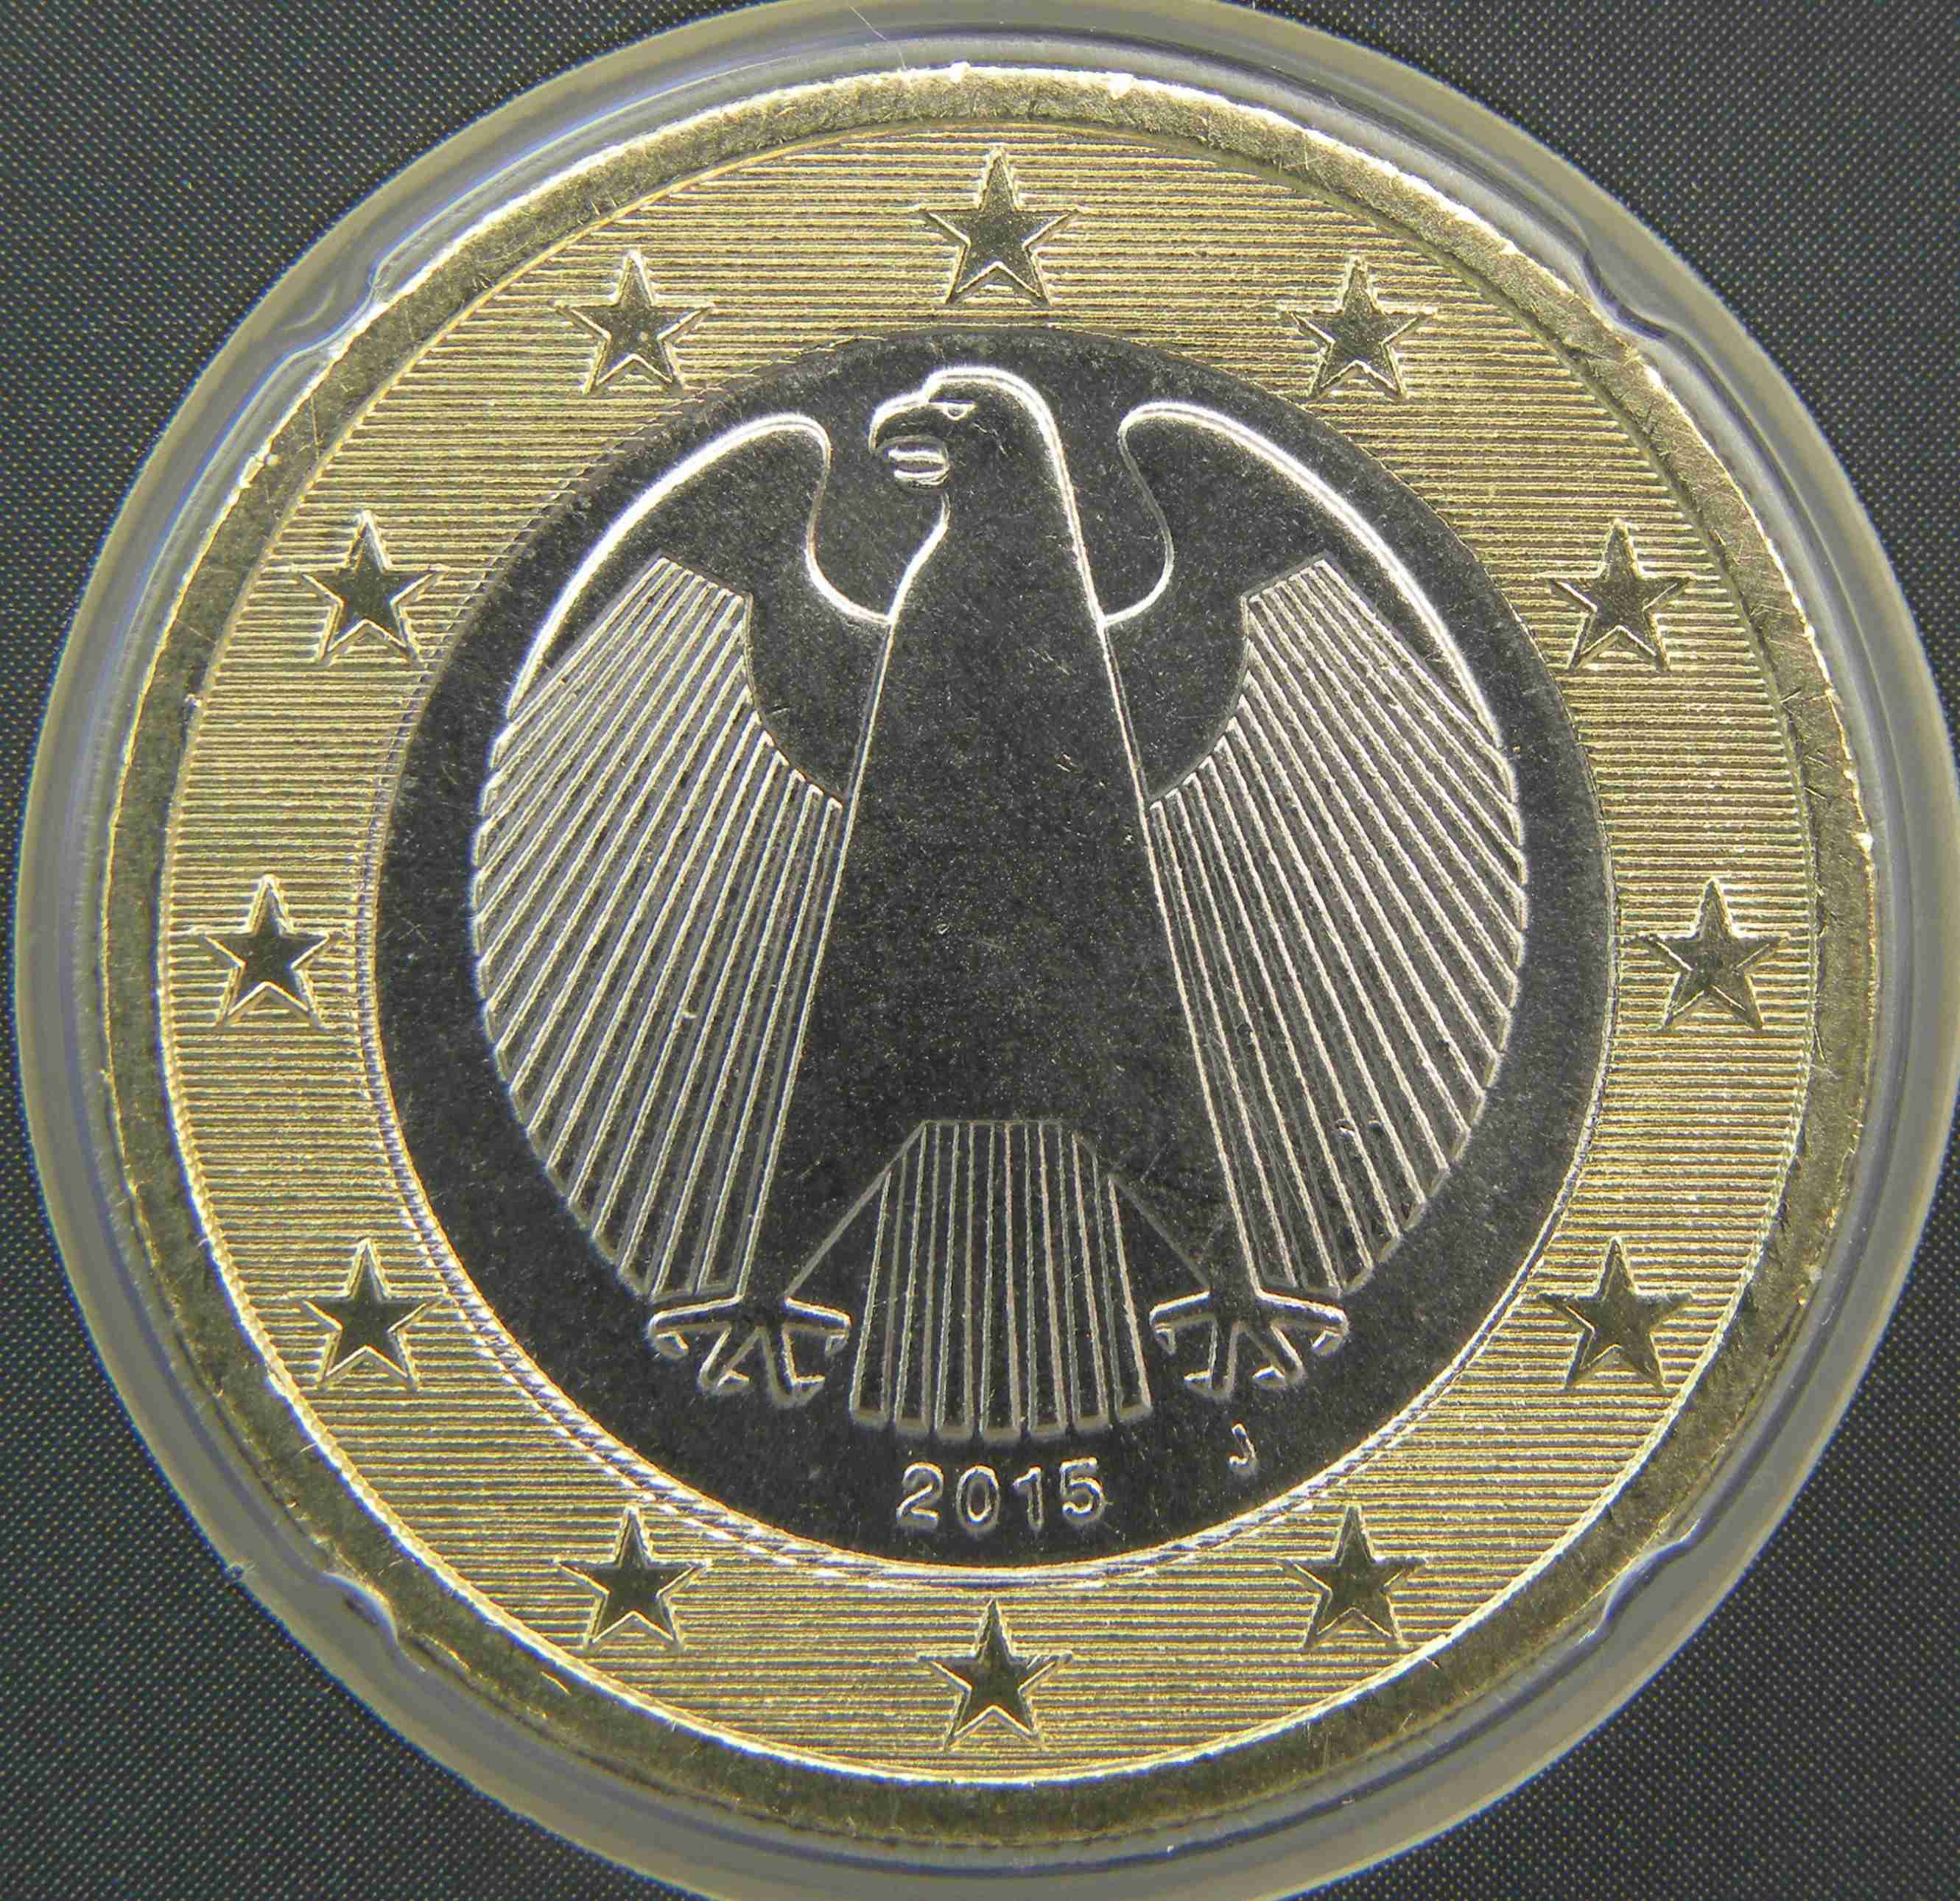 Germany 1 Euro Coin 2015 J - euro-coins.tv - The Online ...